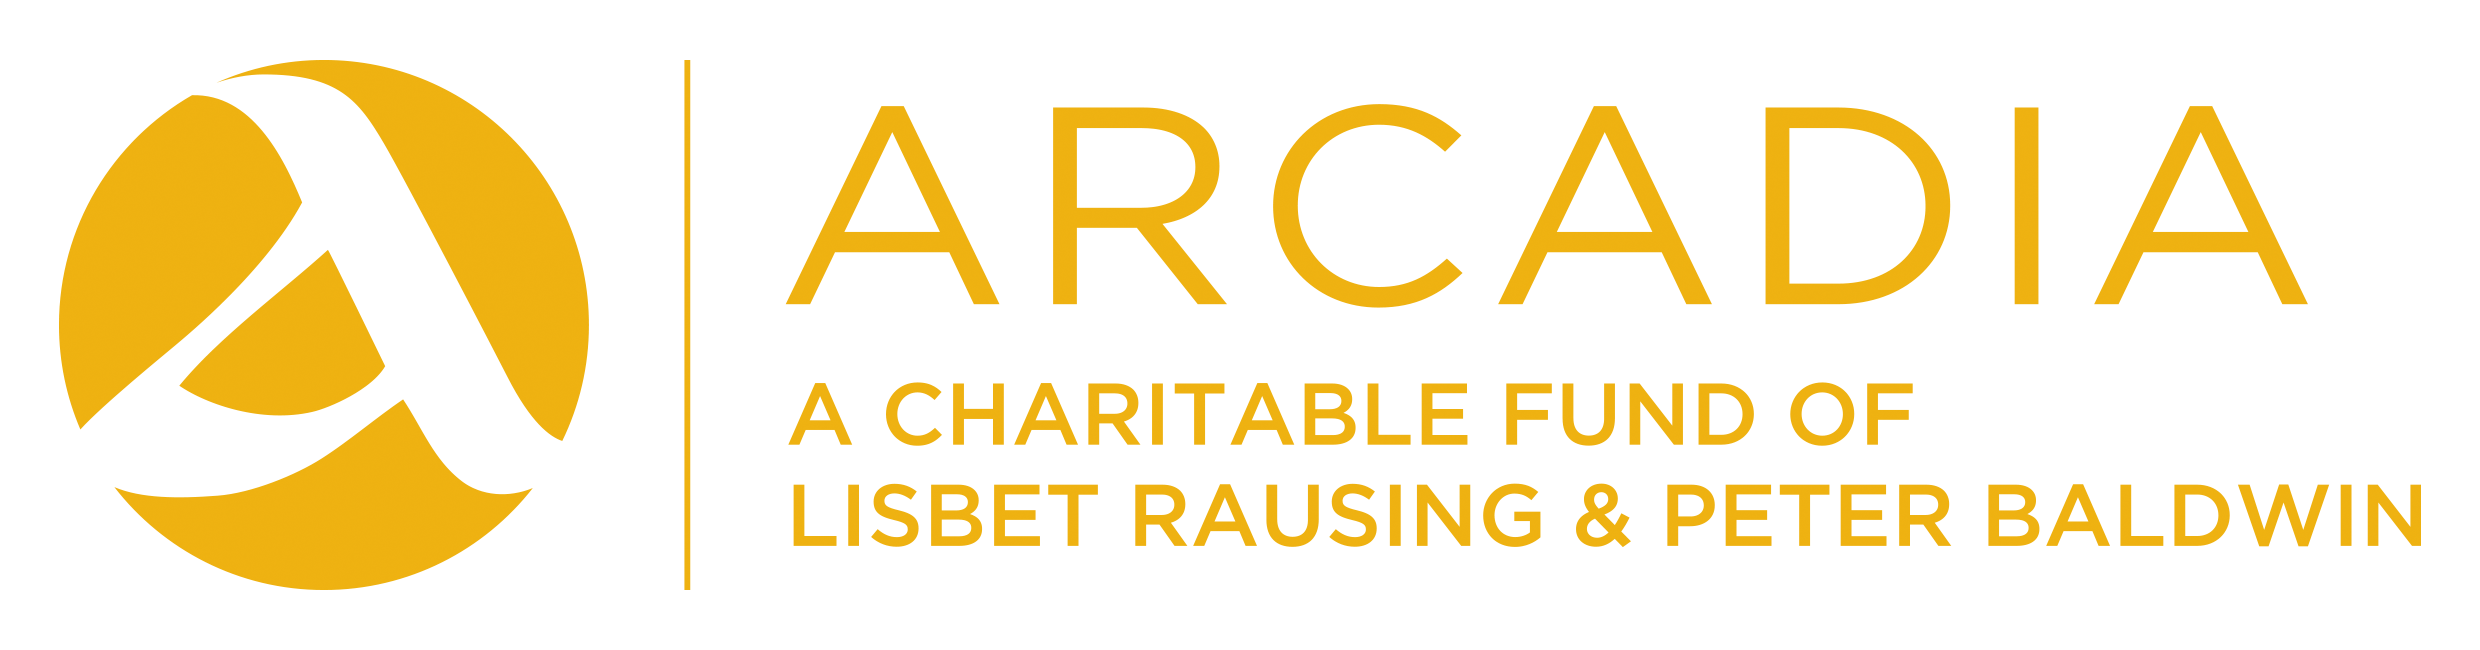 Arcadia, a charitable fund of Lisbet Rausing and Peter Baldwin logoi